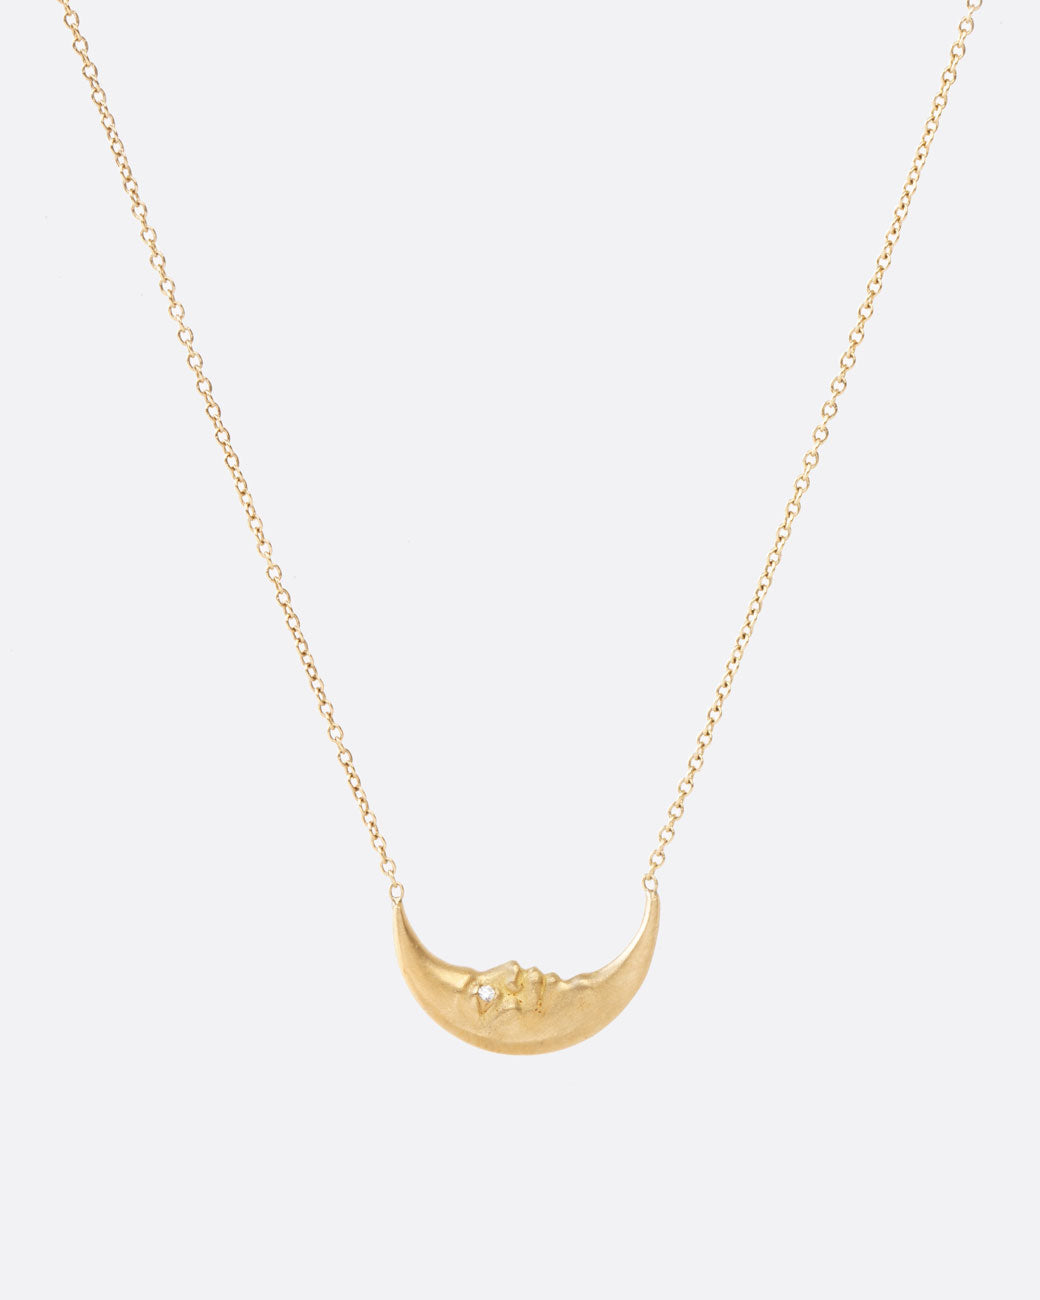 Close up front view of a tiny yellow gold crescent moon, with a face carved into it and little diamond eyes, is a unique pendant. Double sided and hanging from a chain. The chain is attached to the ends of the crescent, so it falls on a sideways/horizontal angle across the chest.